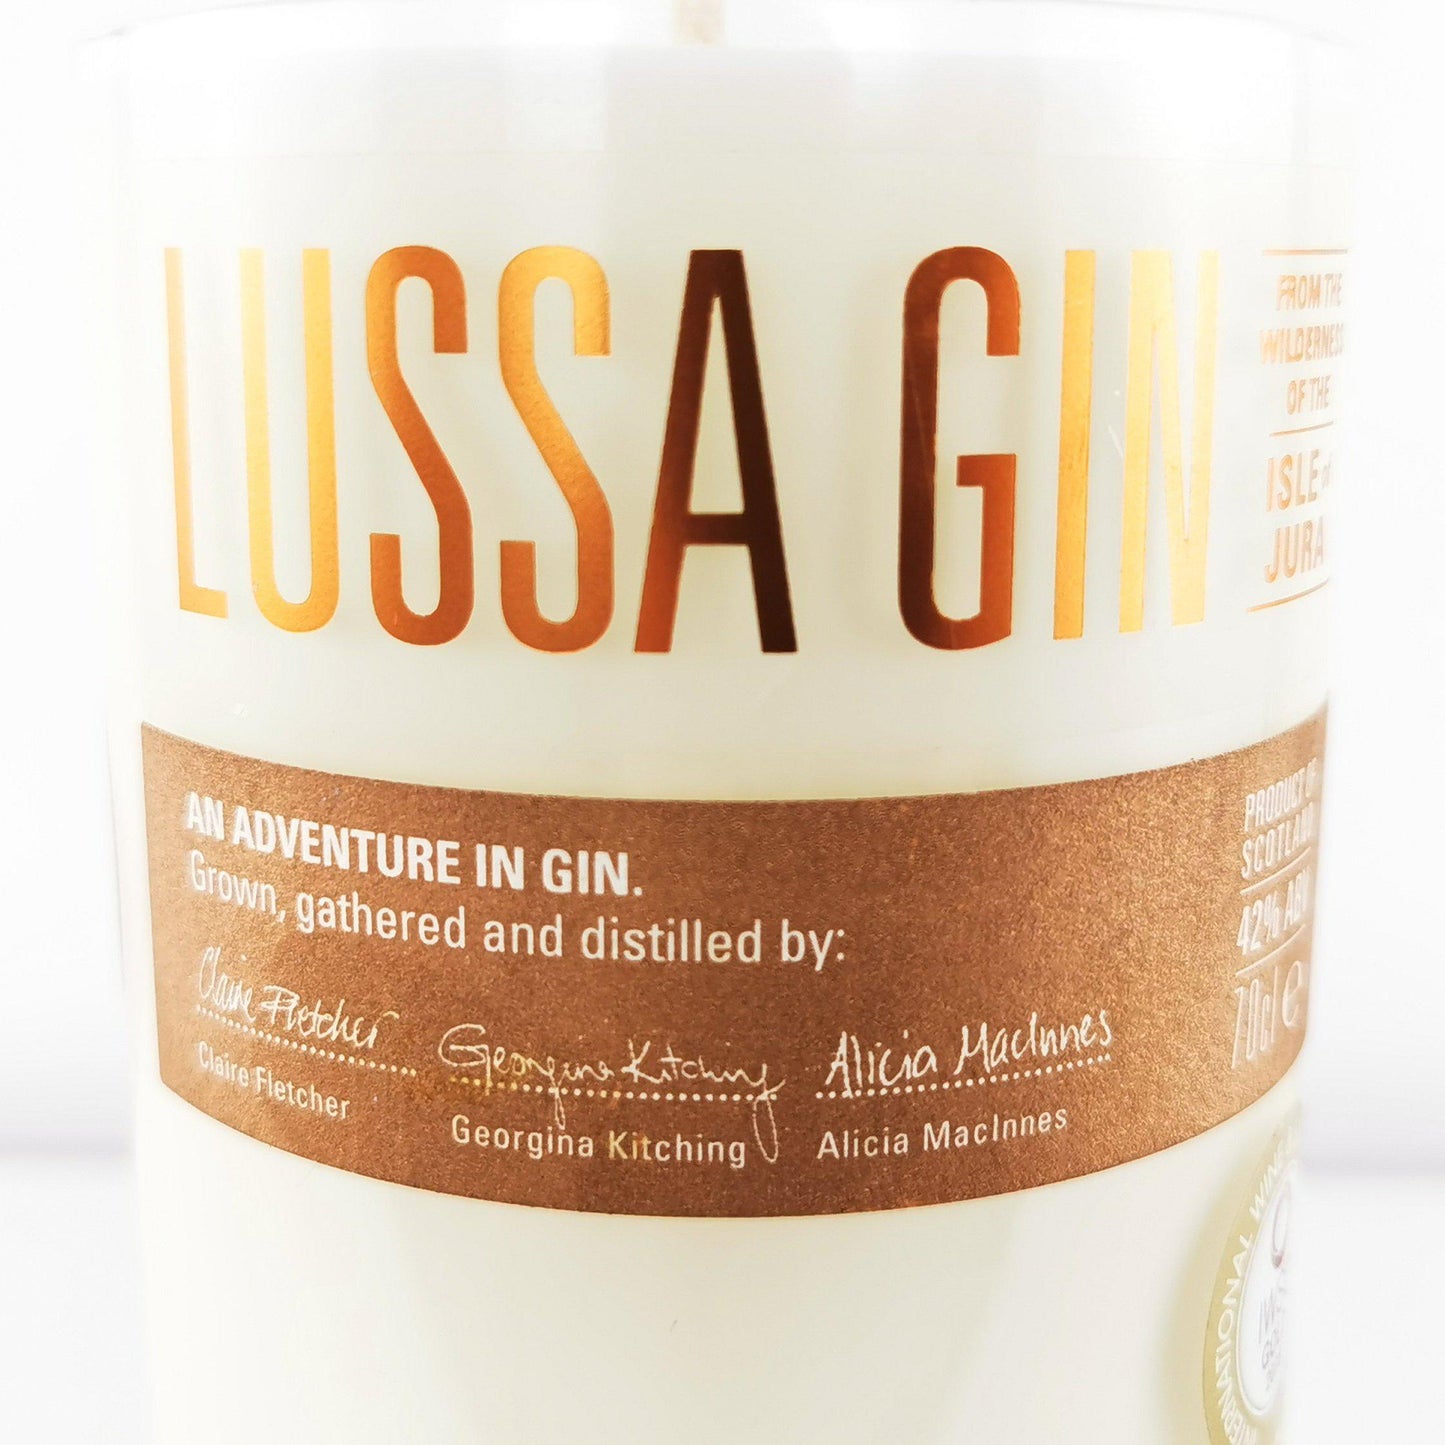 Eco Friendly-Lussa Gin Bottle Candle-Gin Bottle Candles-Adhock Homeware